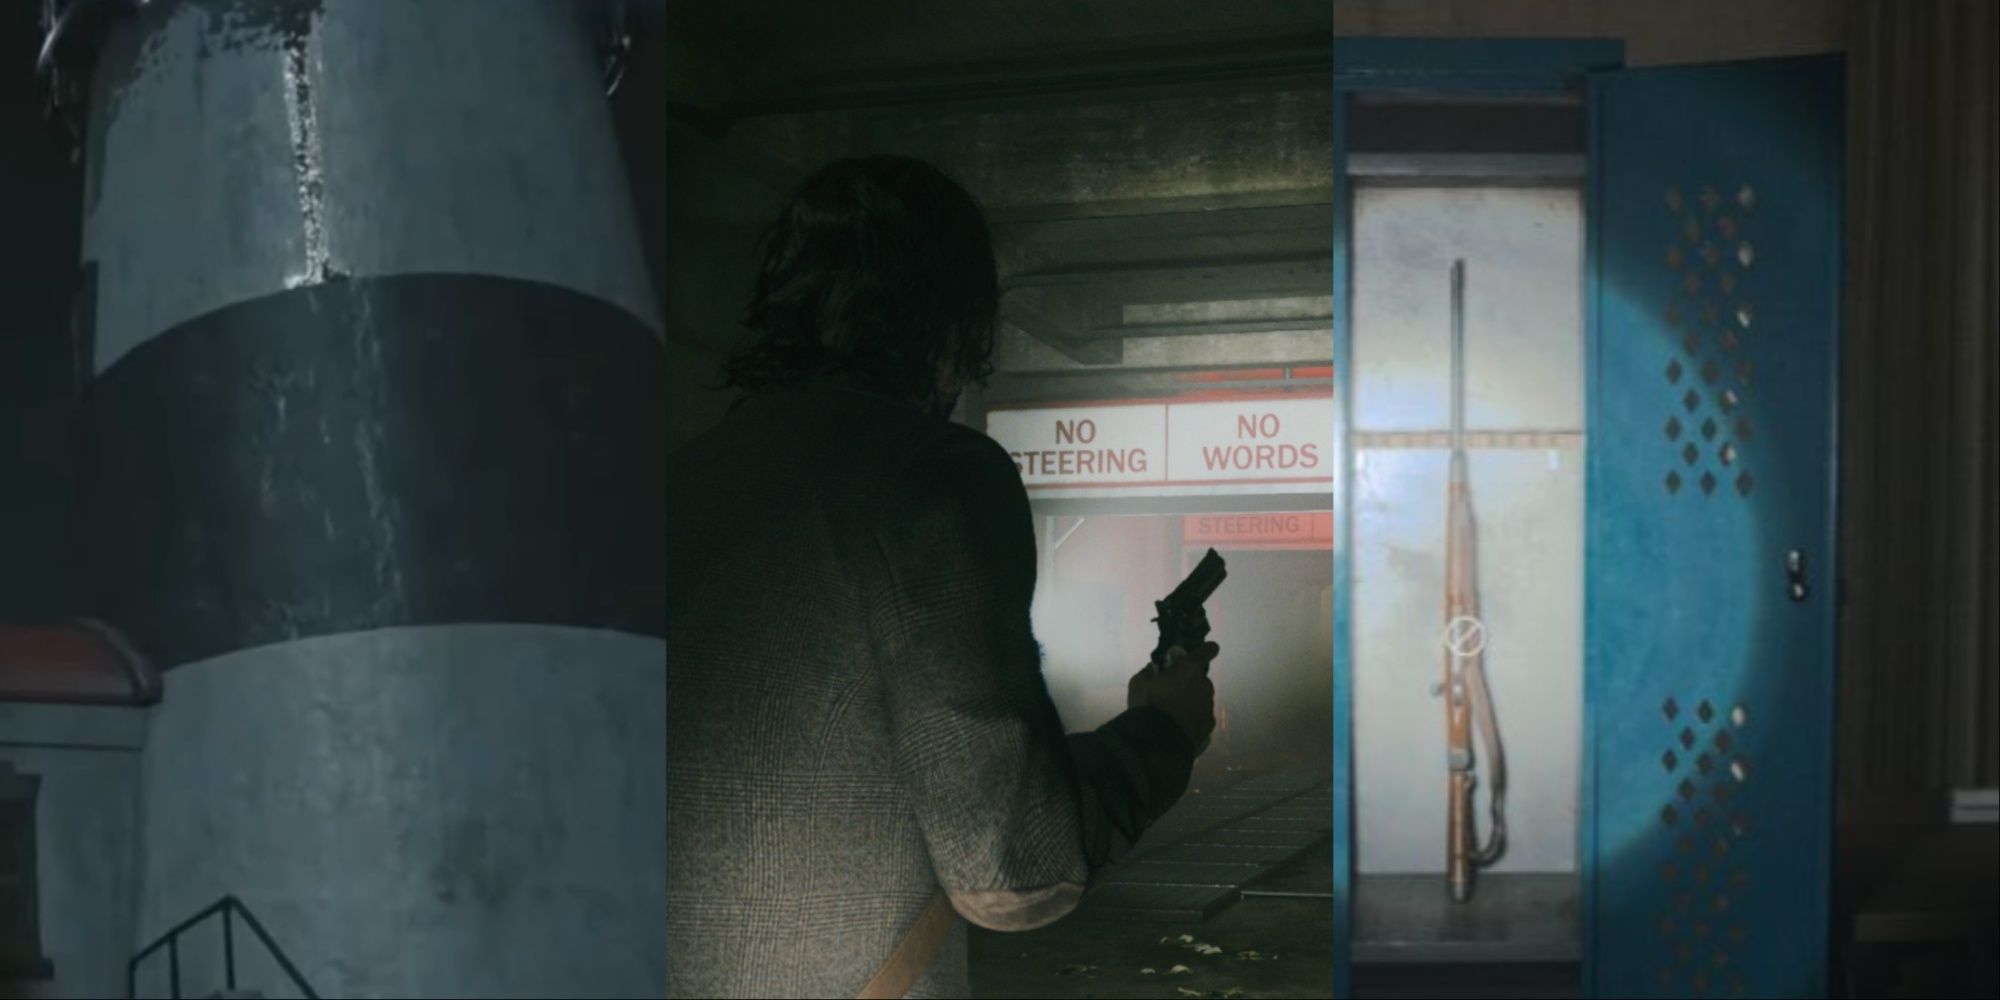 Three-image collage of the Watery Lighhouse up close in the night, Alan with his flashlight and gun inside the Car Wash, and Saga's flashlight shining on the hunting rifle in the blue locker.